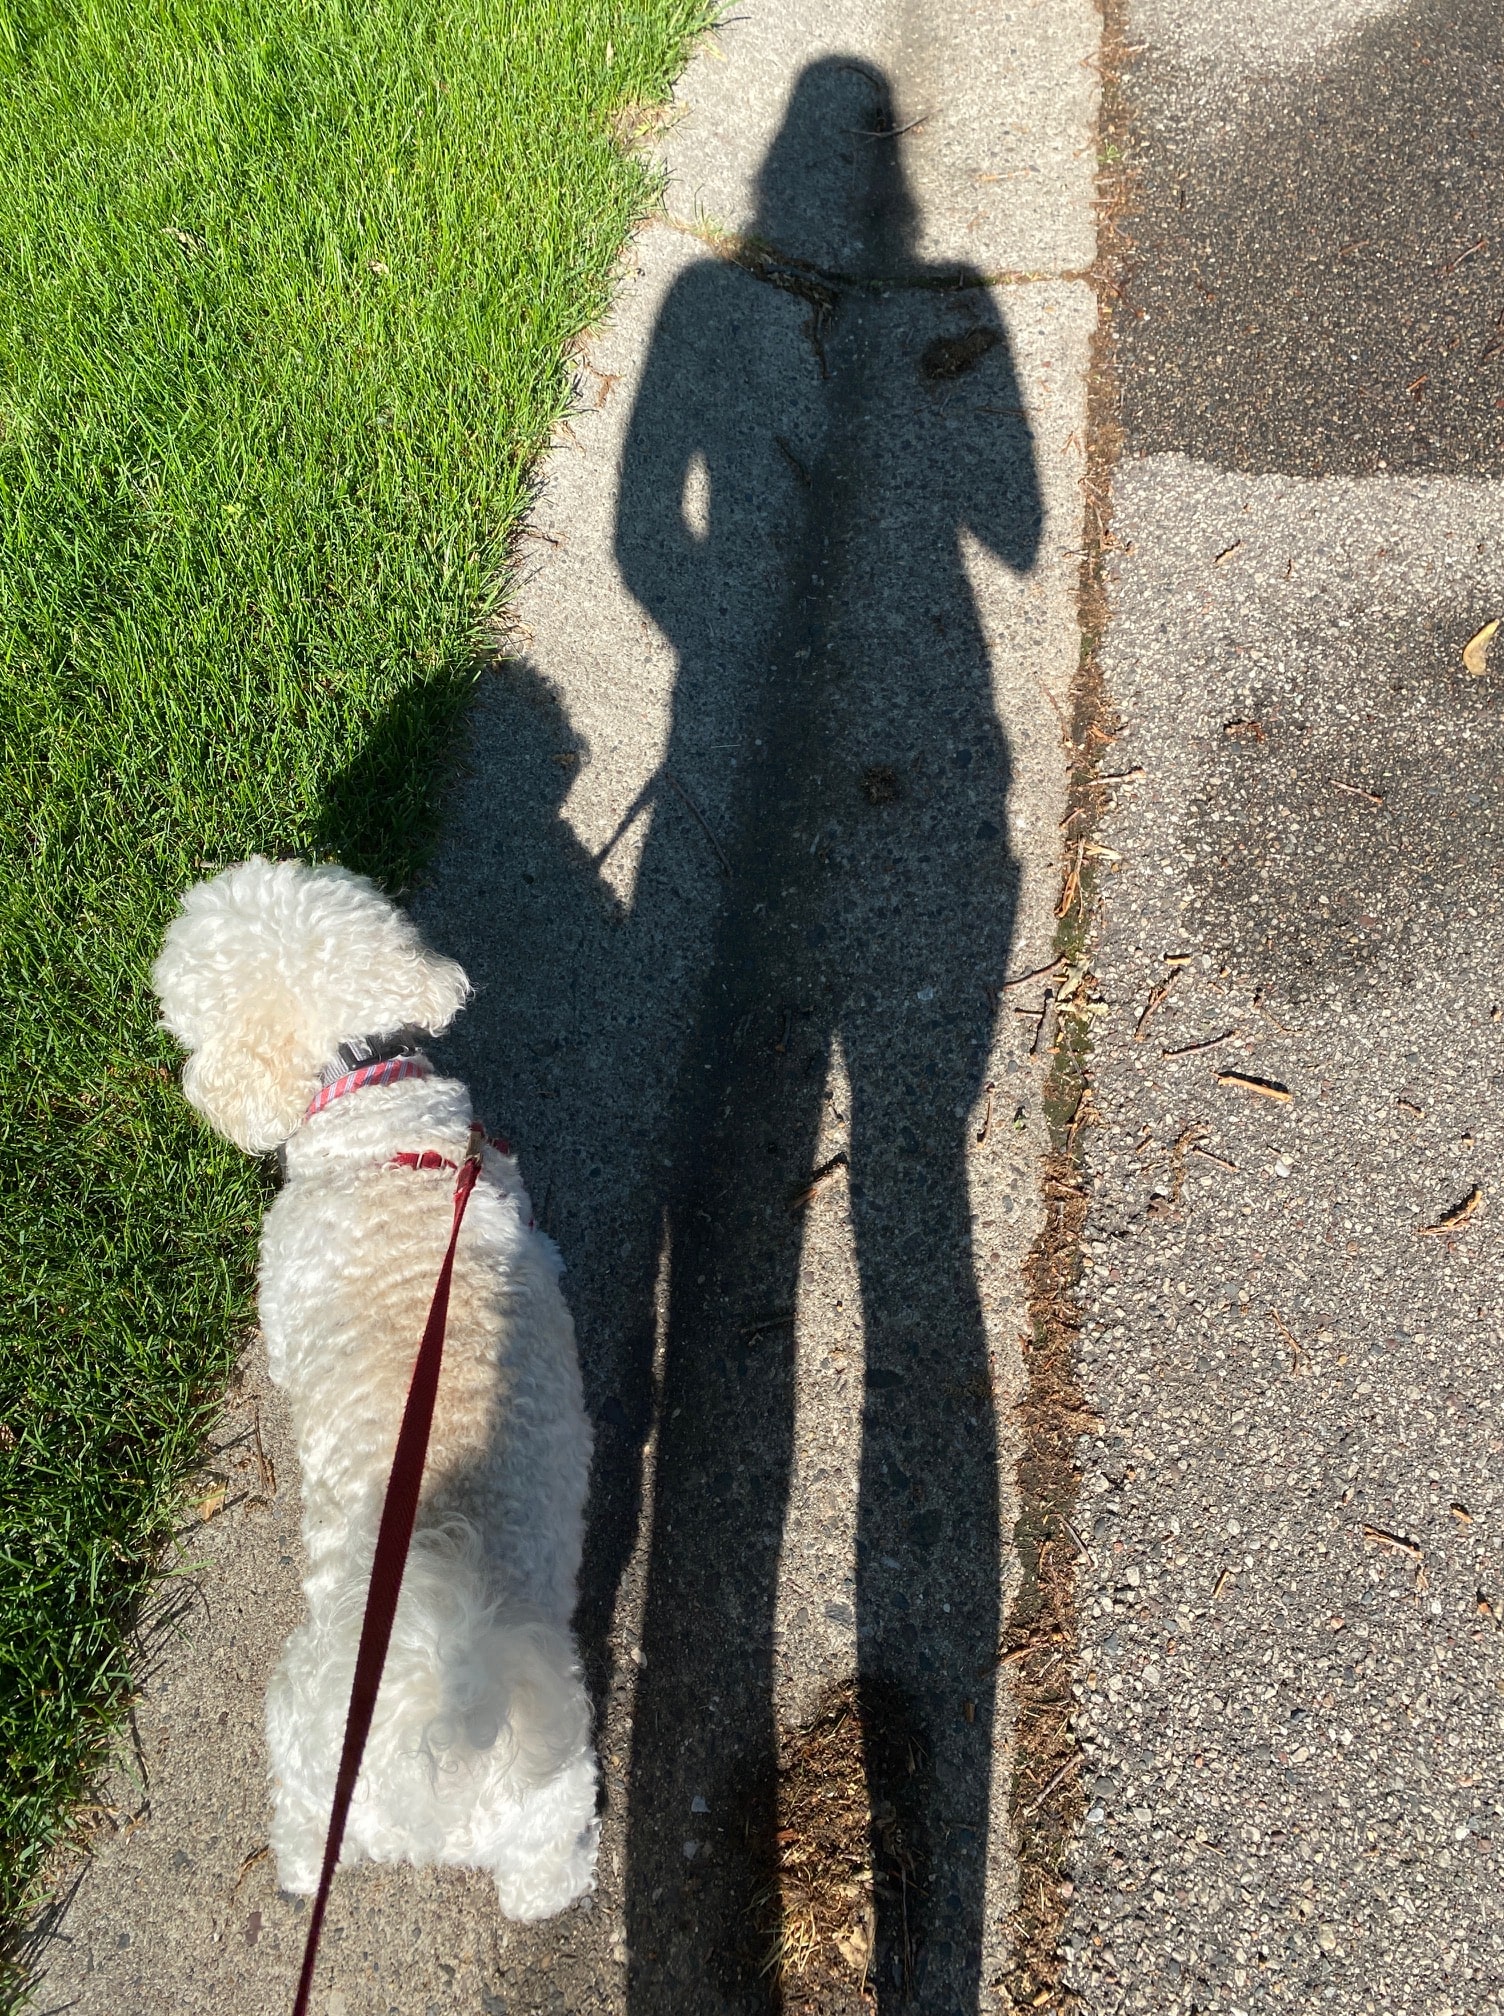 Curb cravings by walking the dog